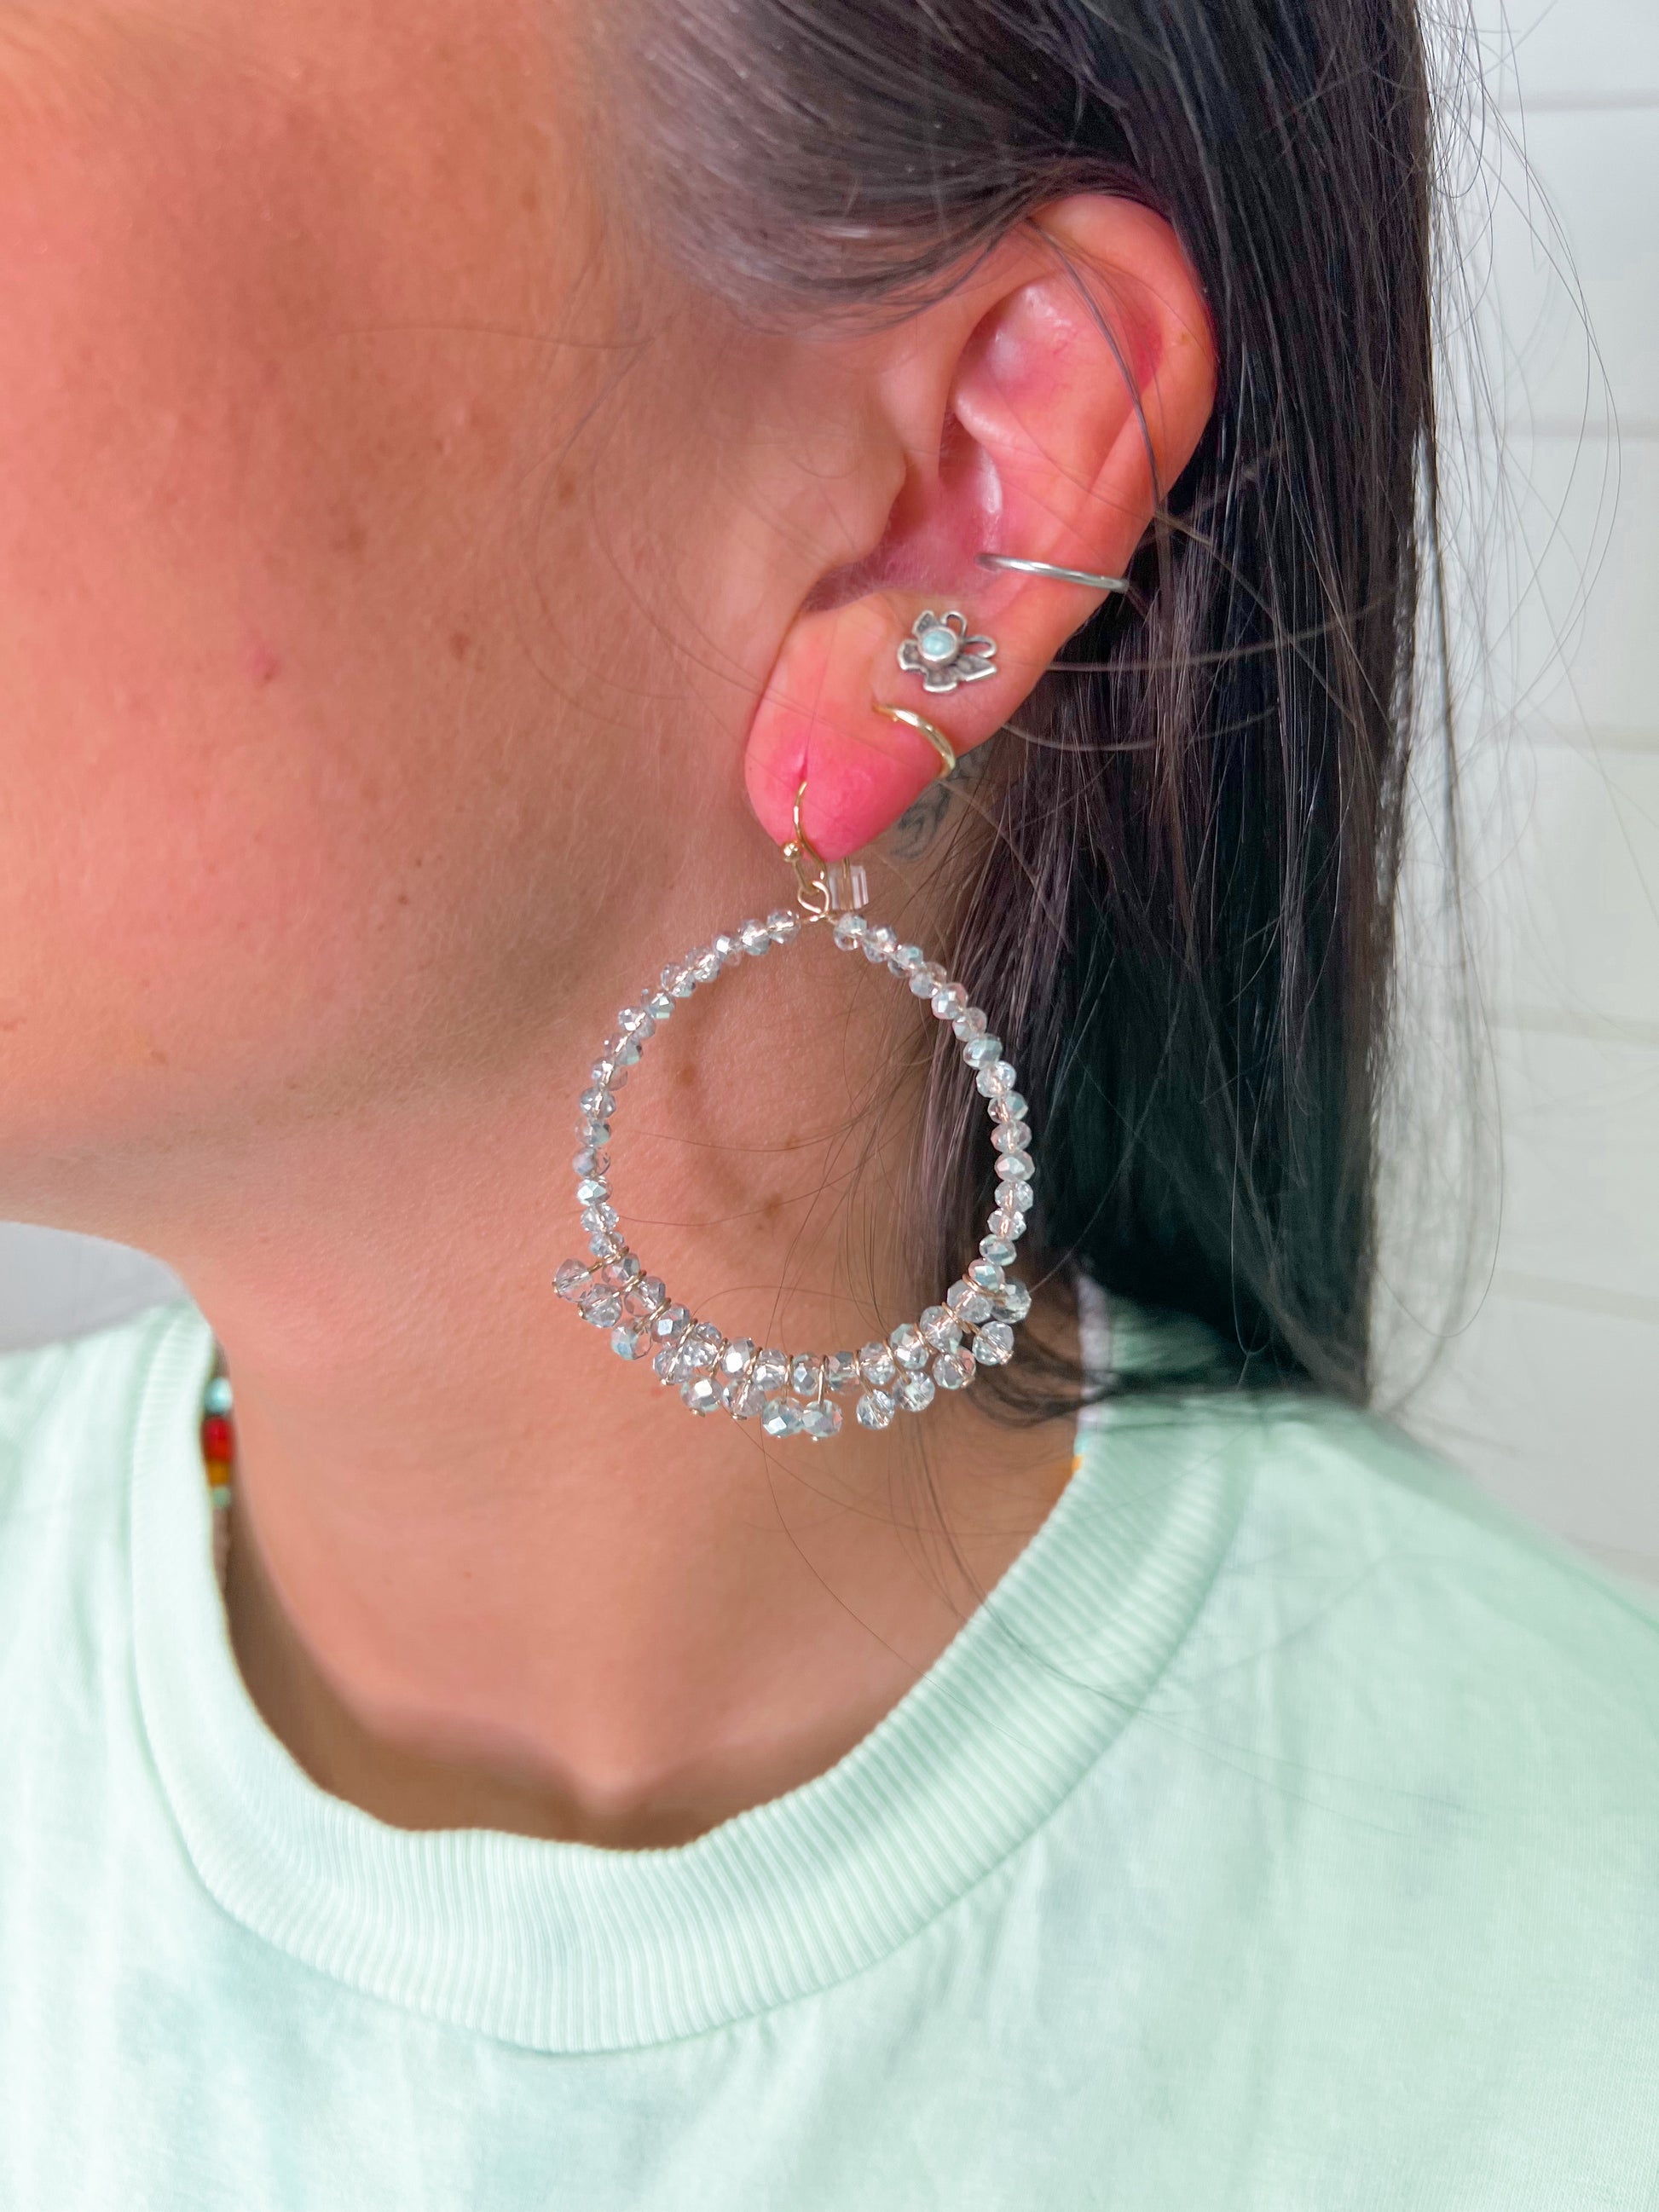 Pink Panache Grey Faceted Bead Circle Hoop Earrings-Earrings-Pink Panache-AUG2021, BALL, E539, E539BAB, PAVE, PEARL, Pearl earrings, pink panache, pink panache earrings-The Twisted Chandelier